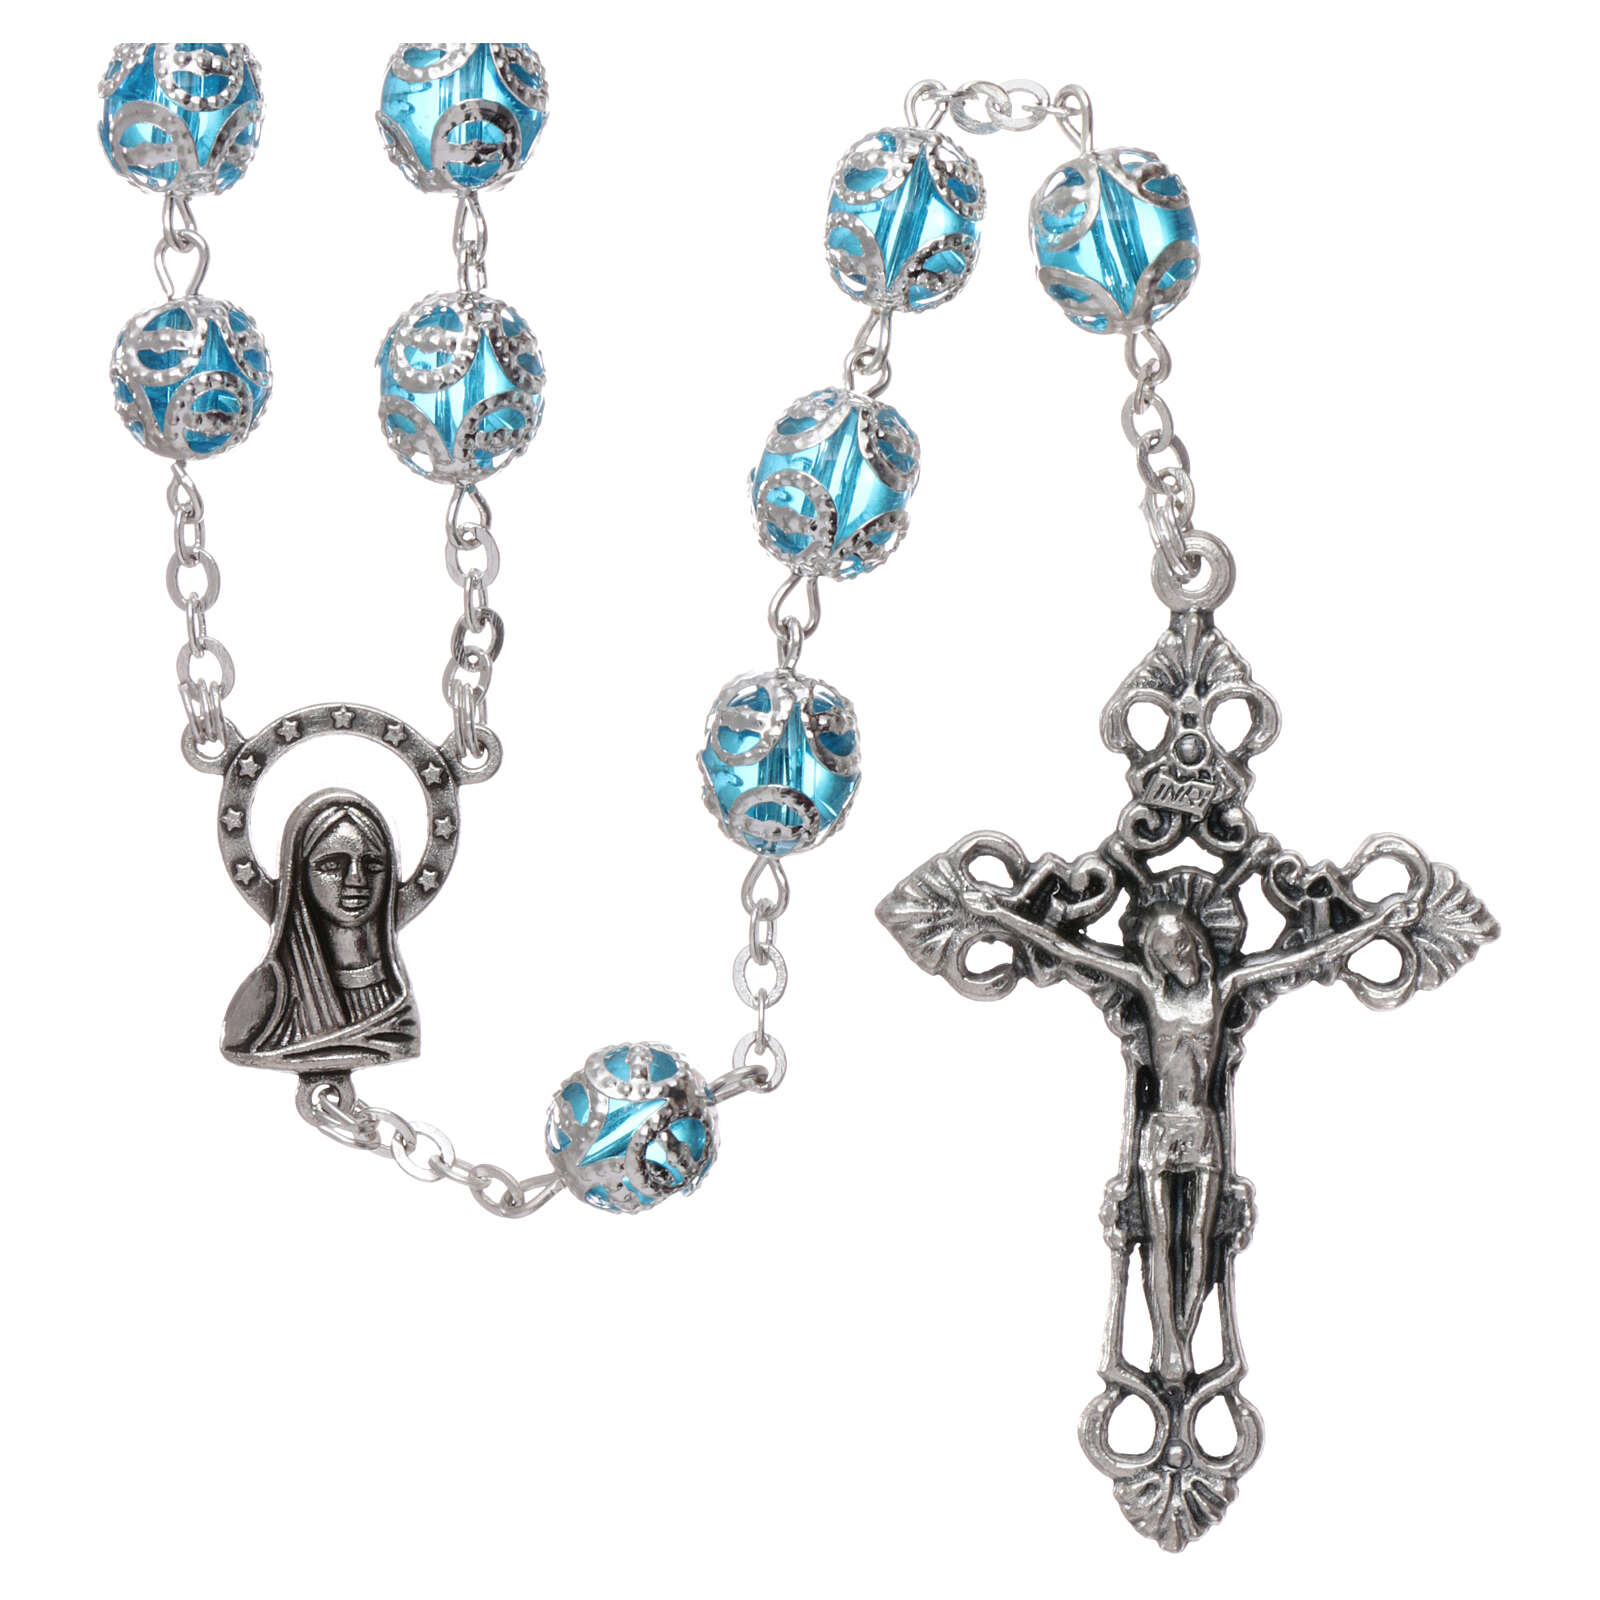 Glass rosary 7 mm water color | online sales on HOLYART.com